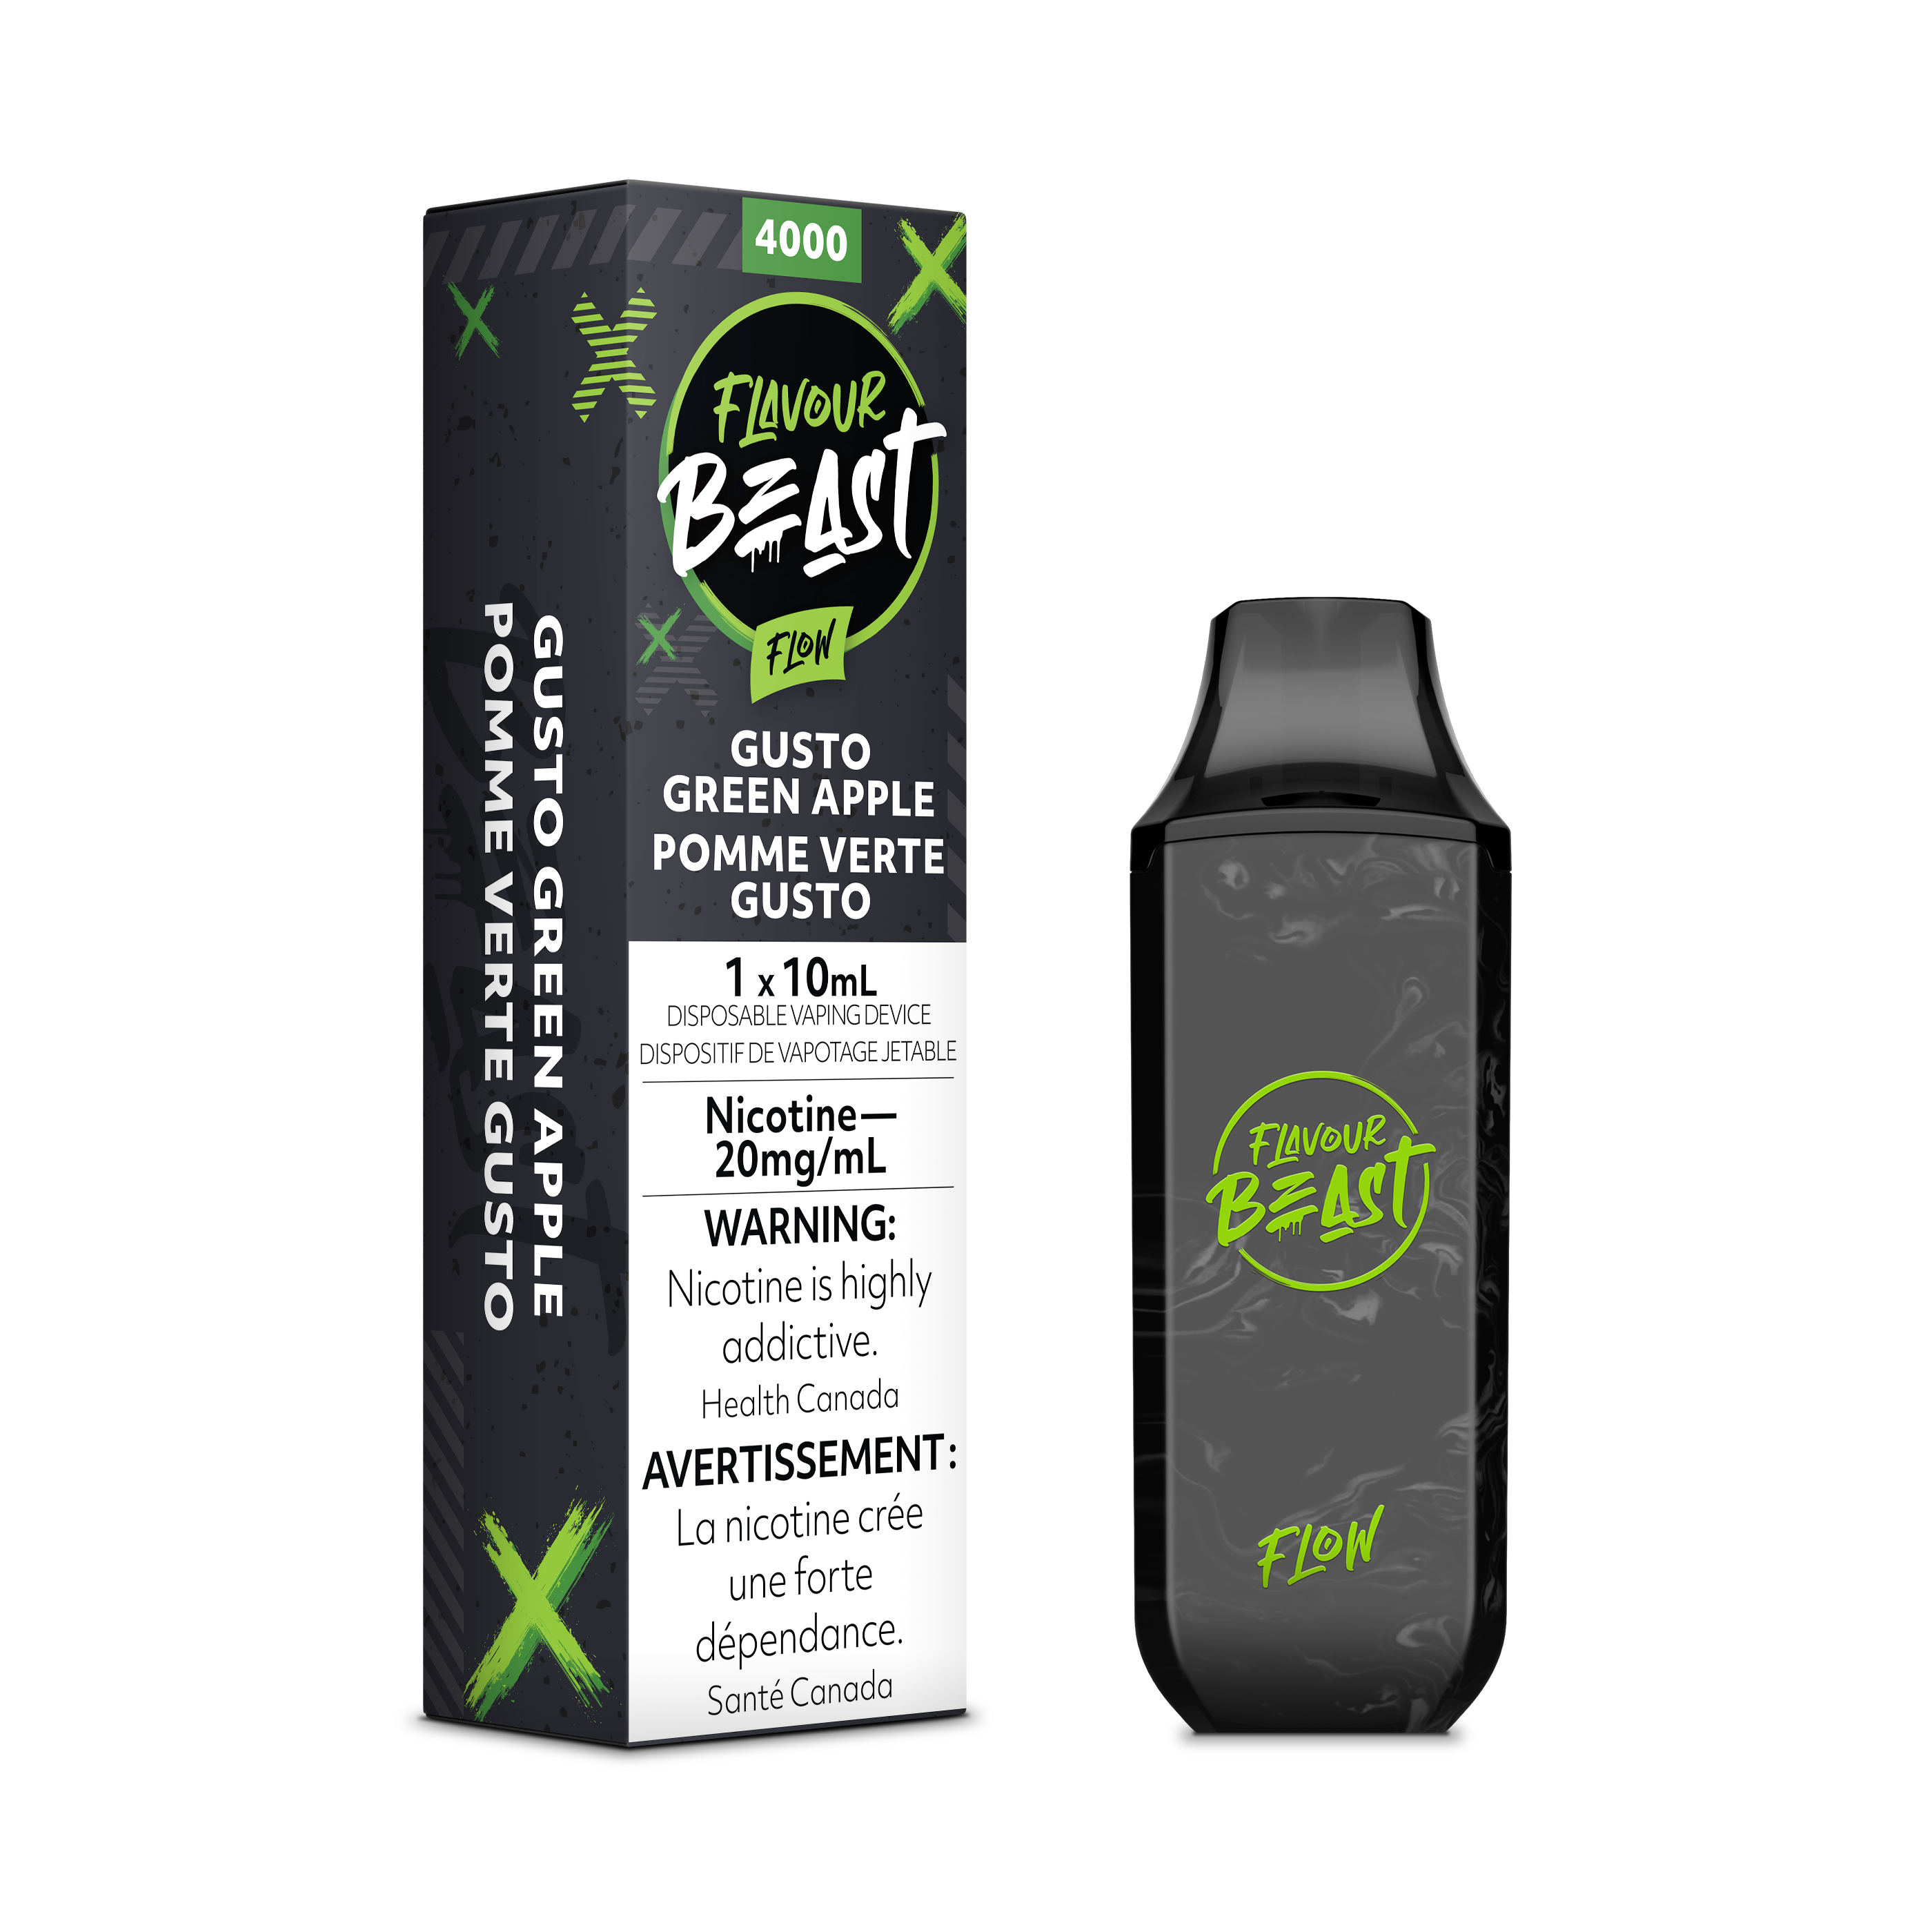 Gusto Green Apple - Flavour Beast Flow 4000 - EXCISED